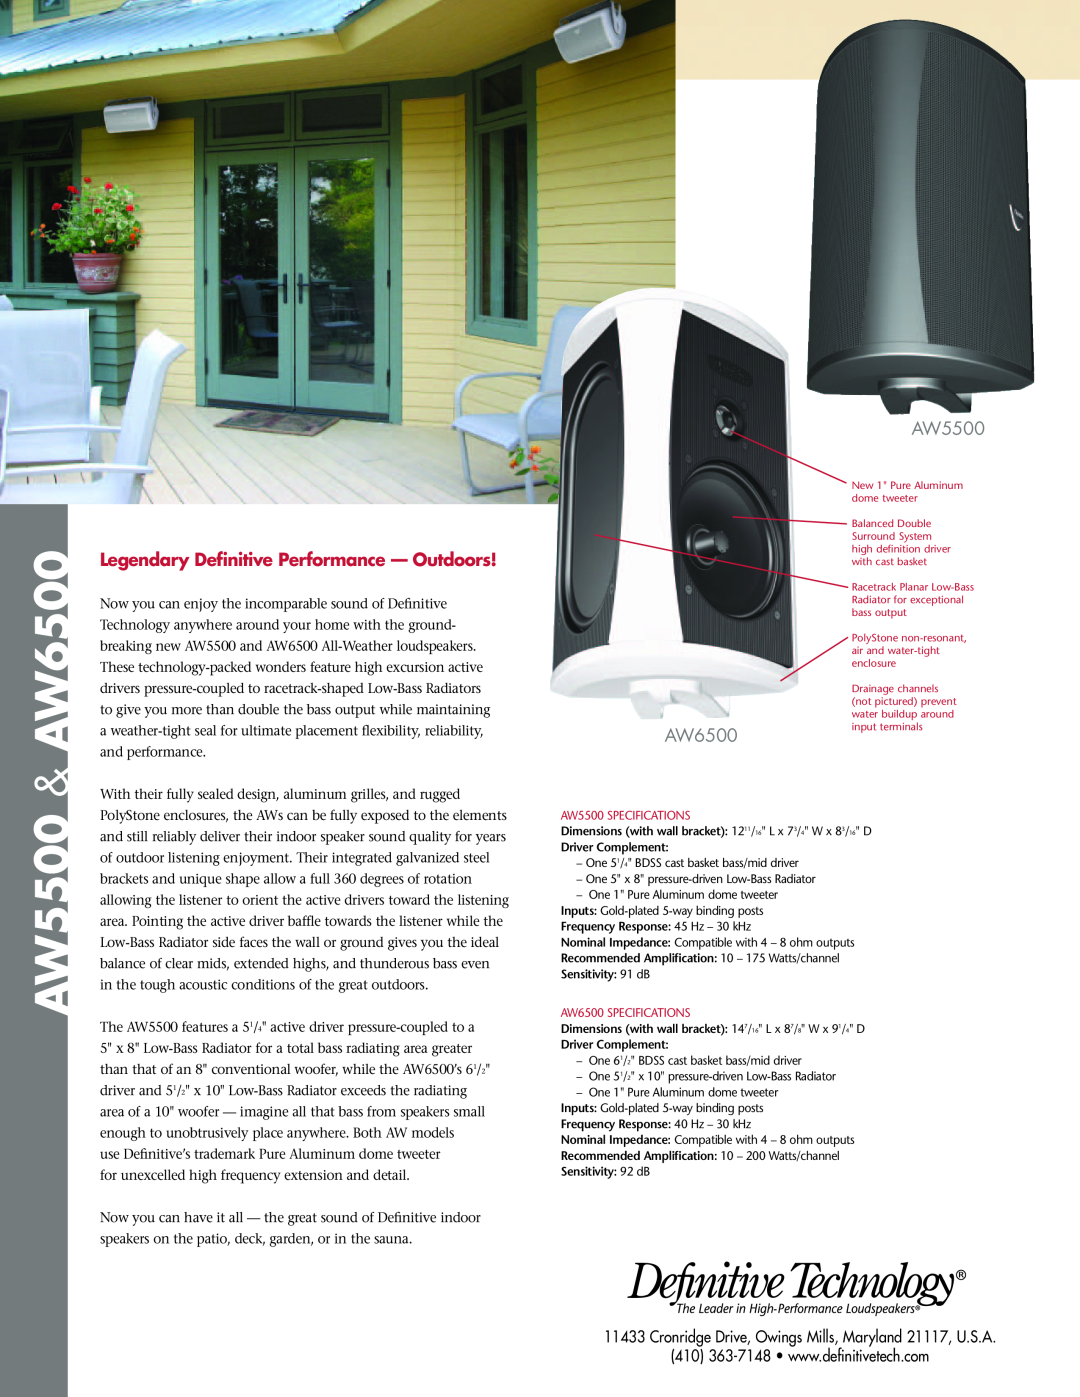 Definitive Technology manual Legendary Deﬁnitive Performance - Outdoors, AW5500 & AW6500 